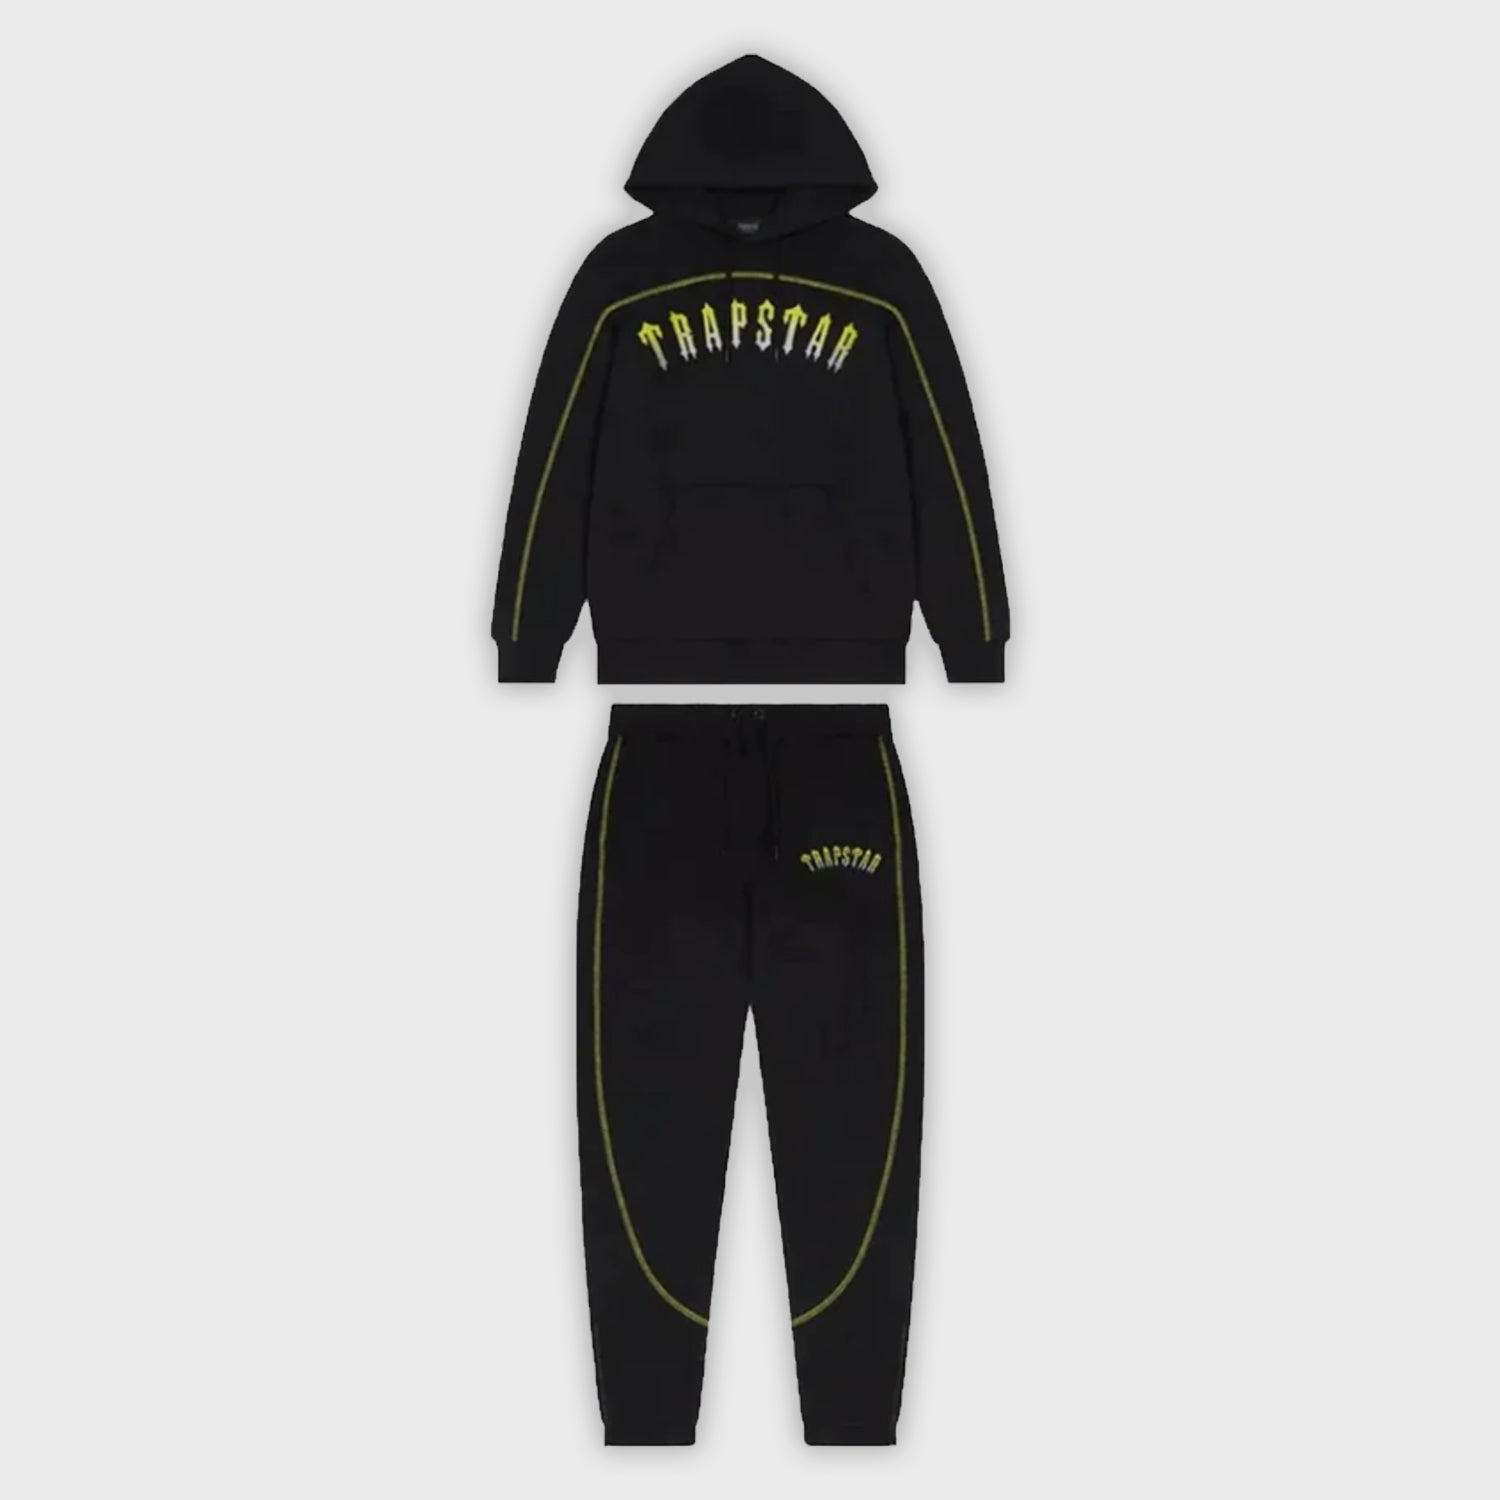 Trapstar Irongate Arch Chenile Hoodie Tracksuit Unisex Embroidery